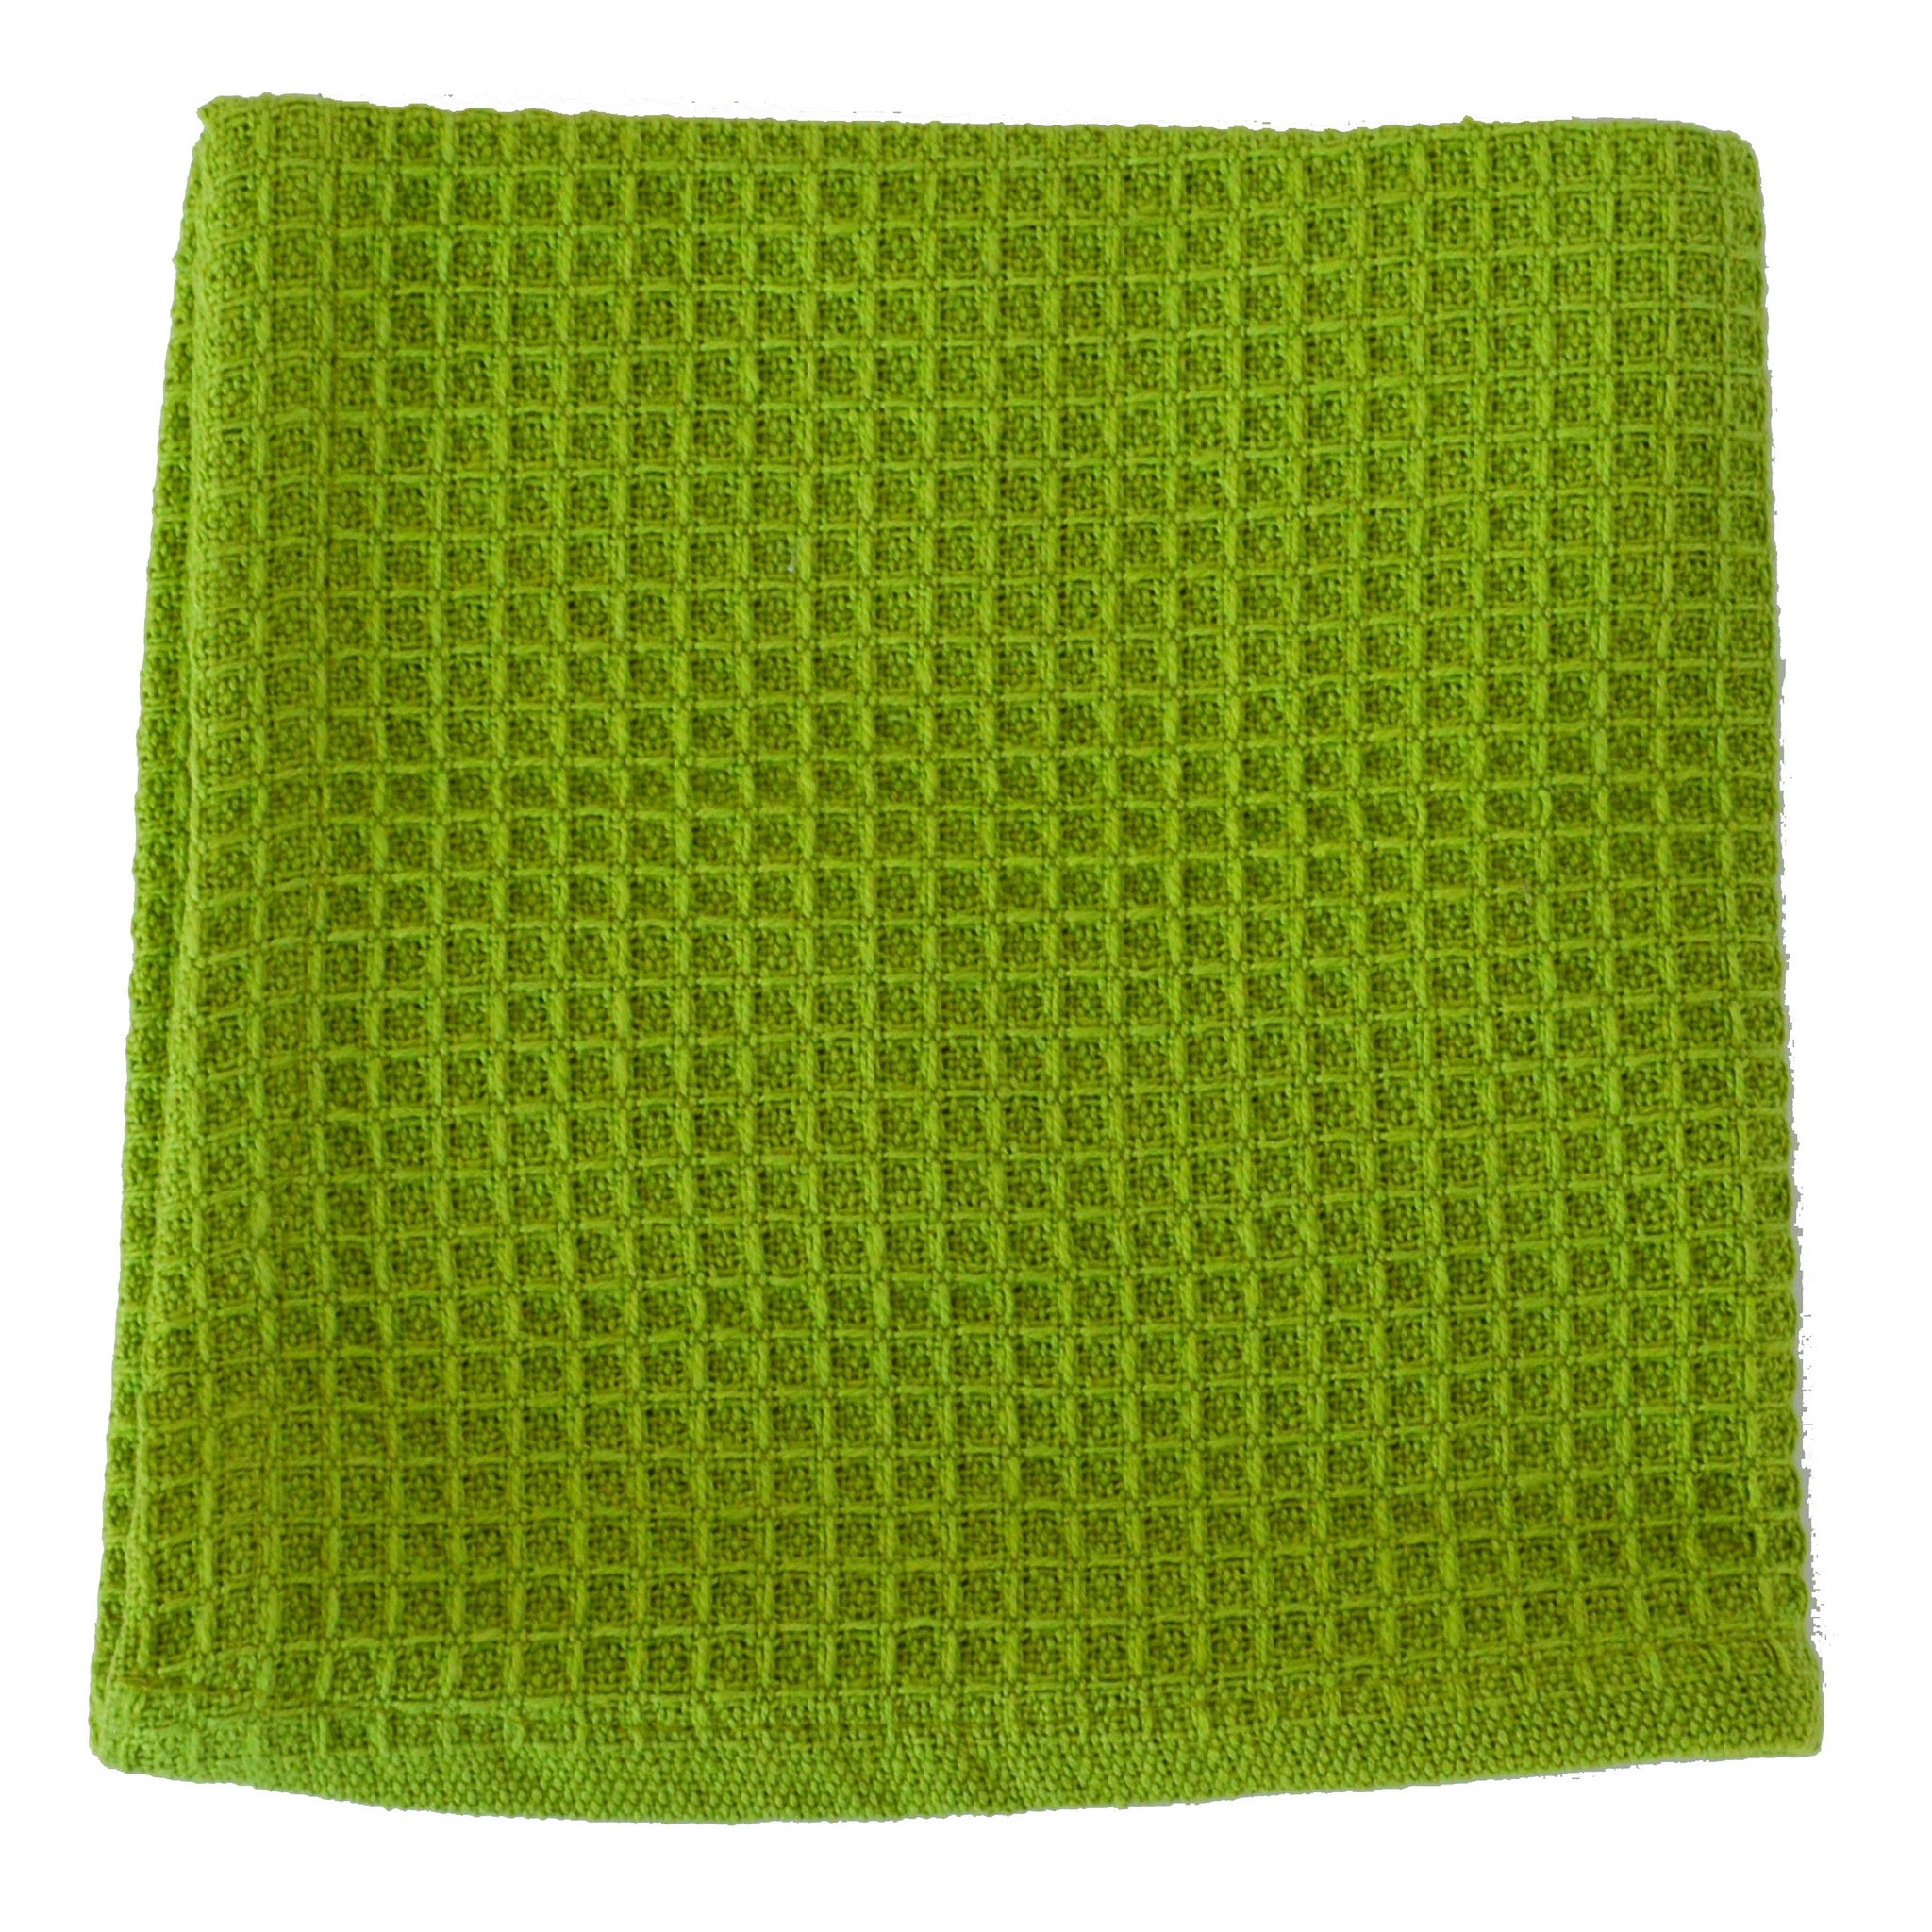 13×13 Waffle Weave Dish Cloth - Bright Red